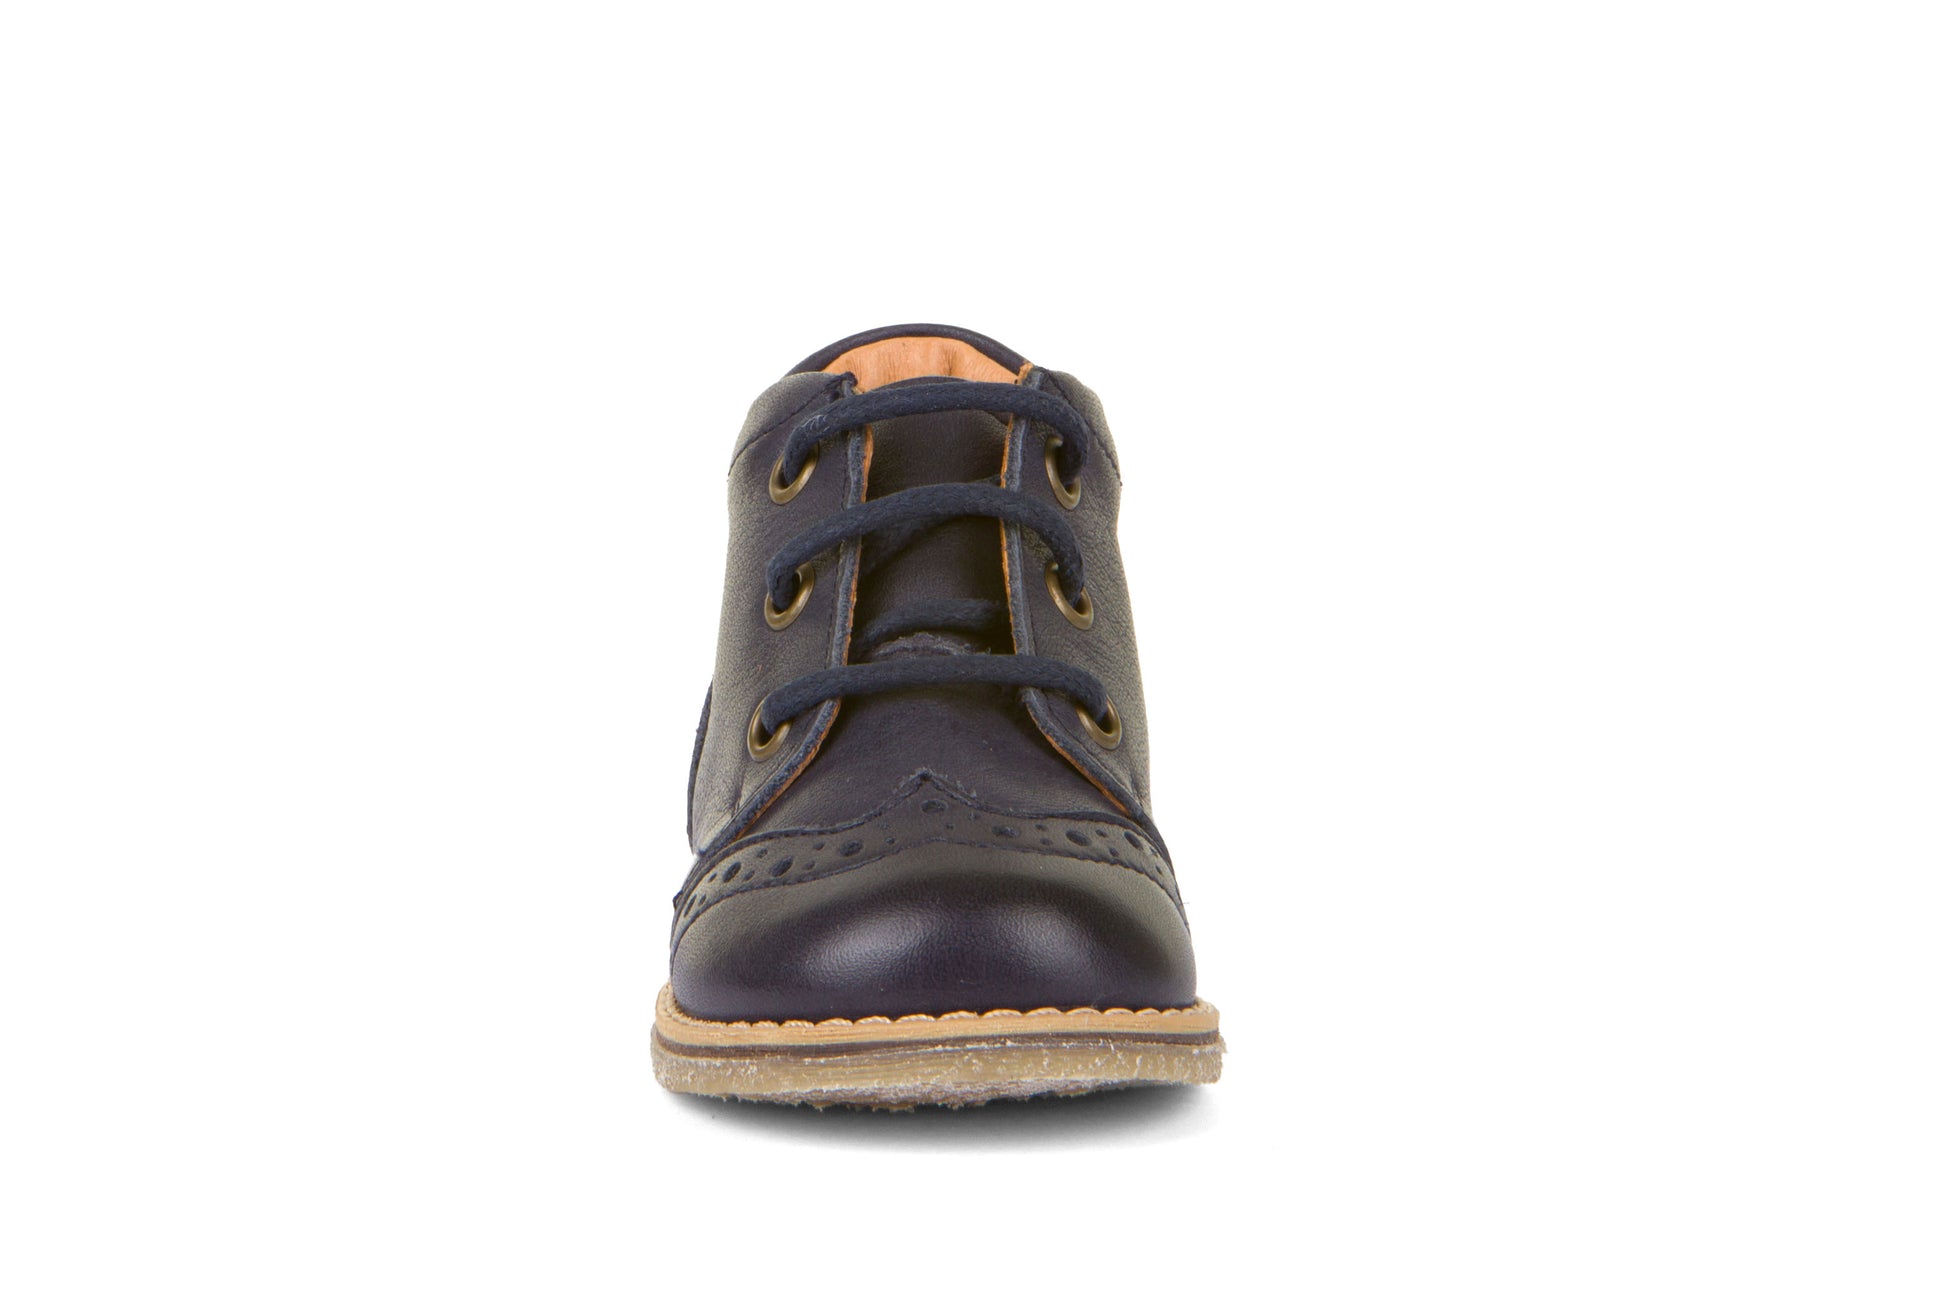 A boys boot by Froddo, style Coper G2130276-2 in Navy with lace-up fastening. Front view.